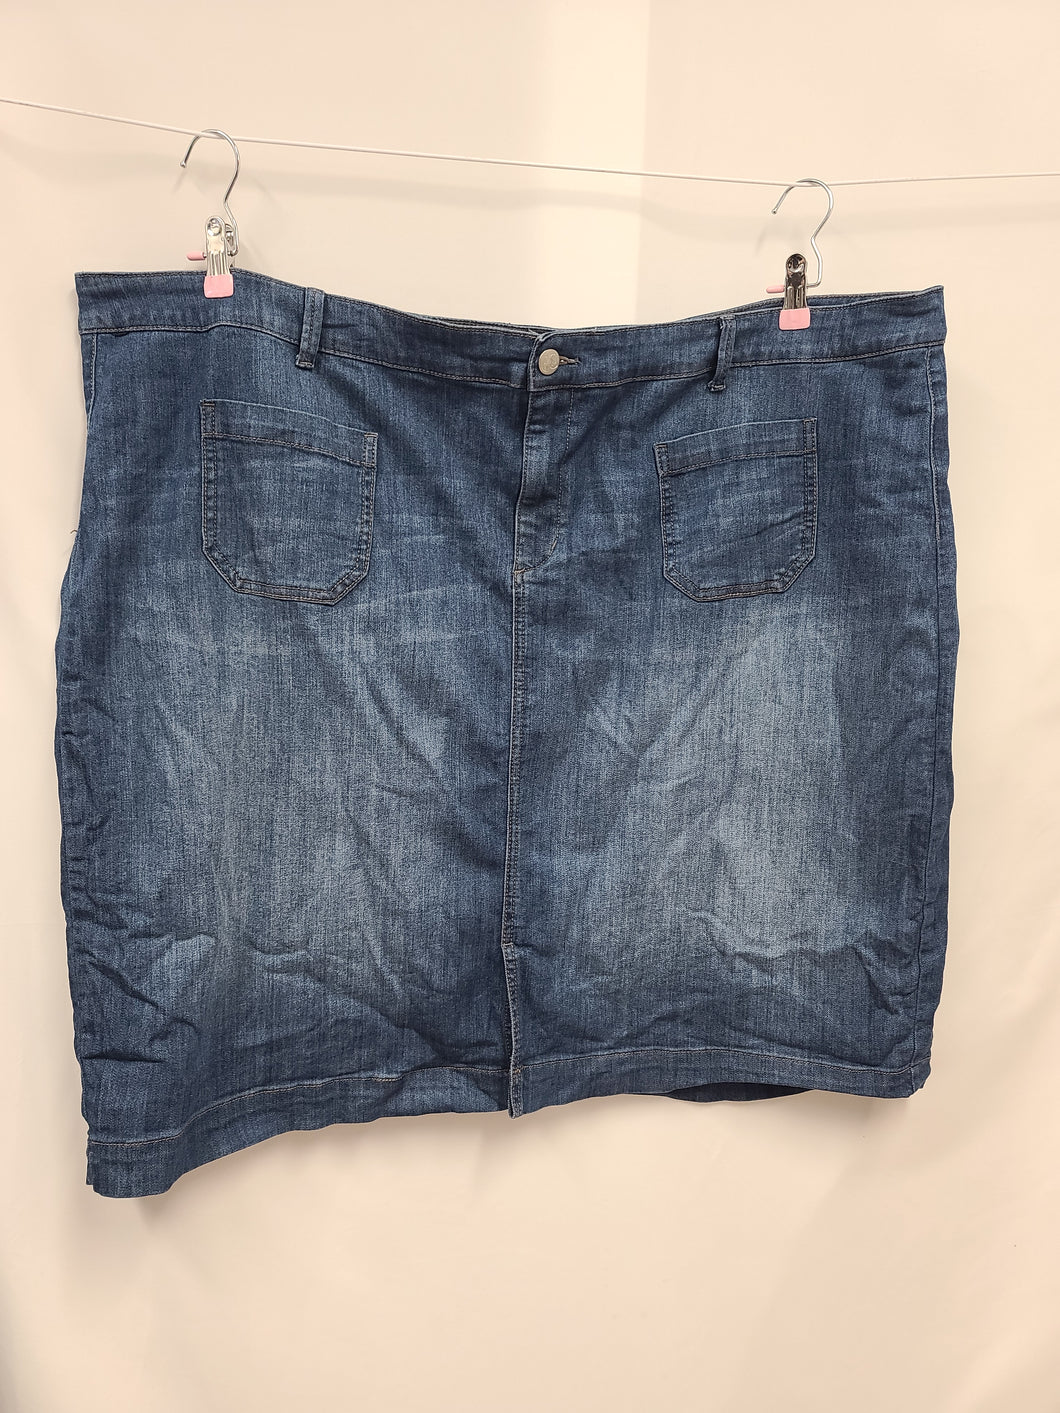 jupe jeans, 32 ans